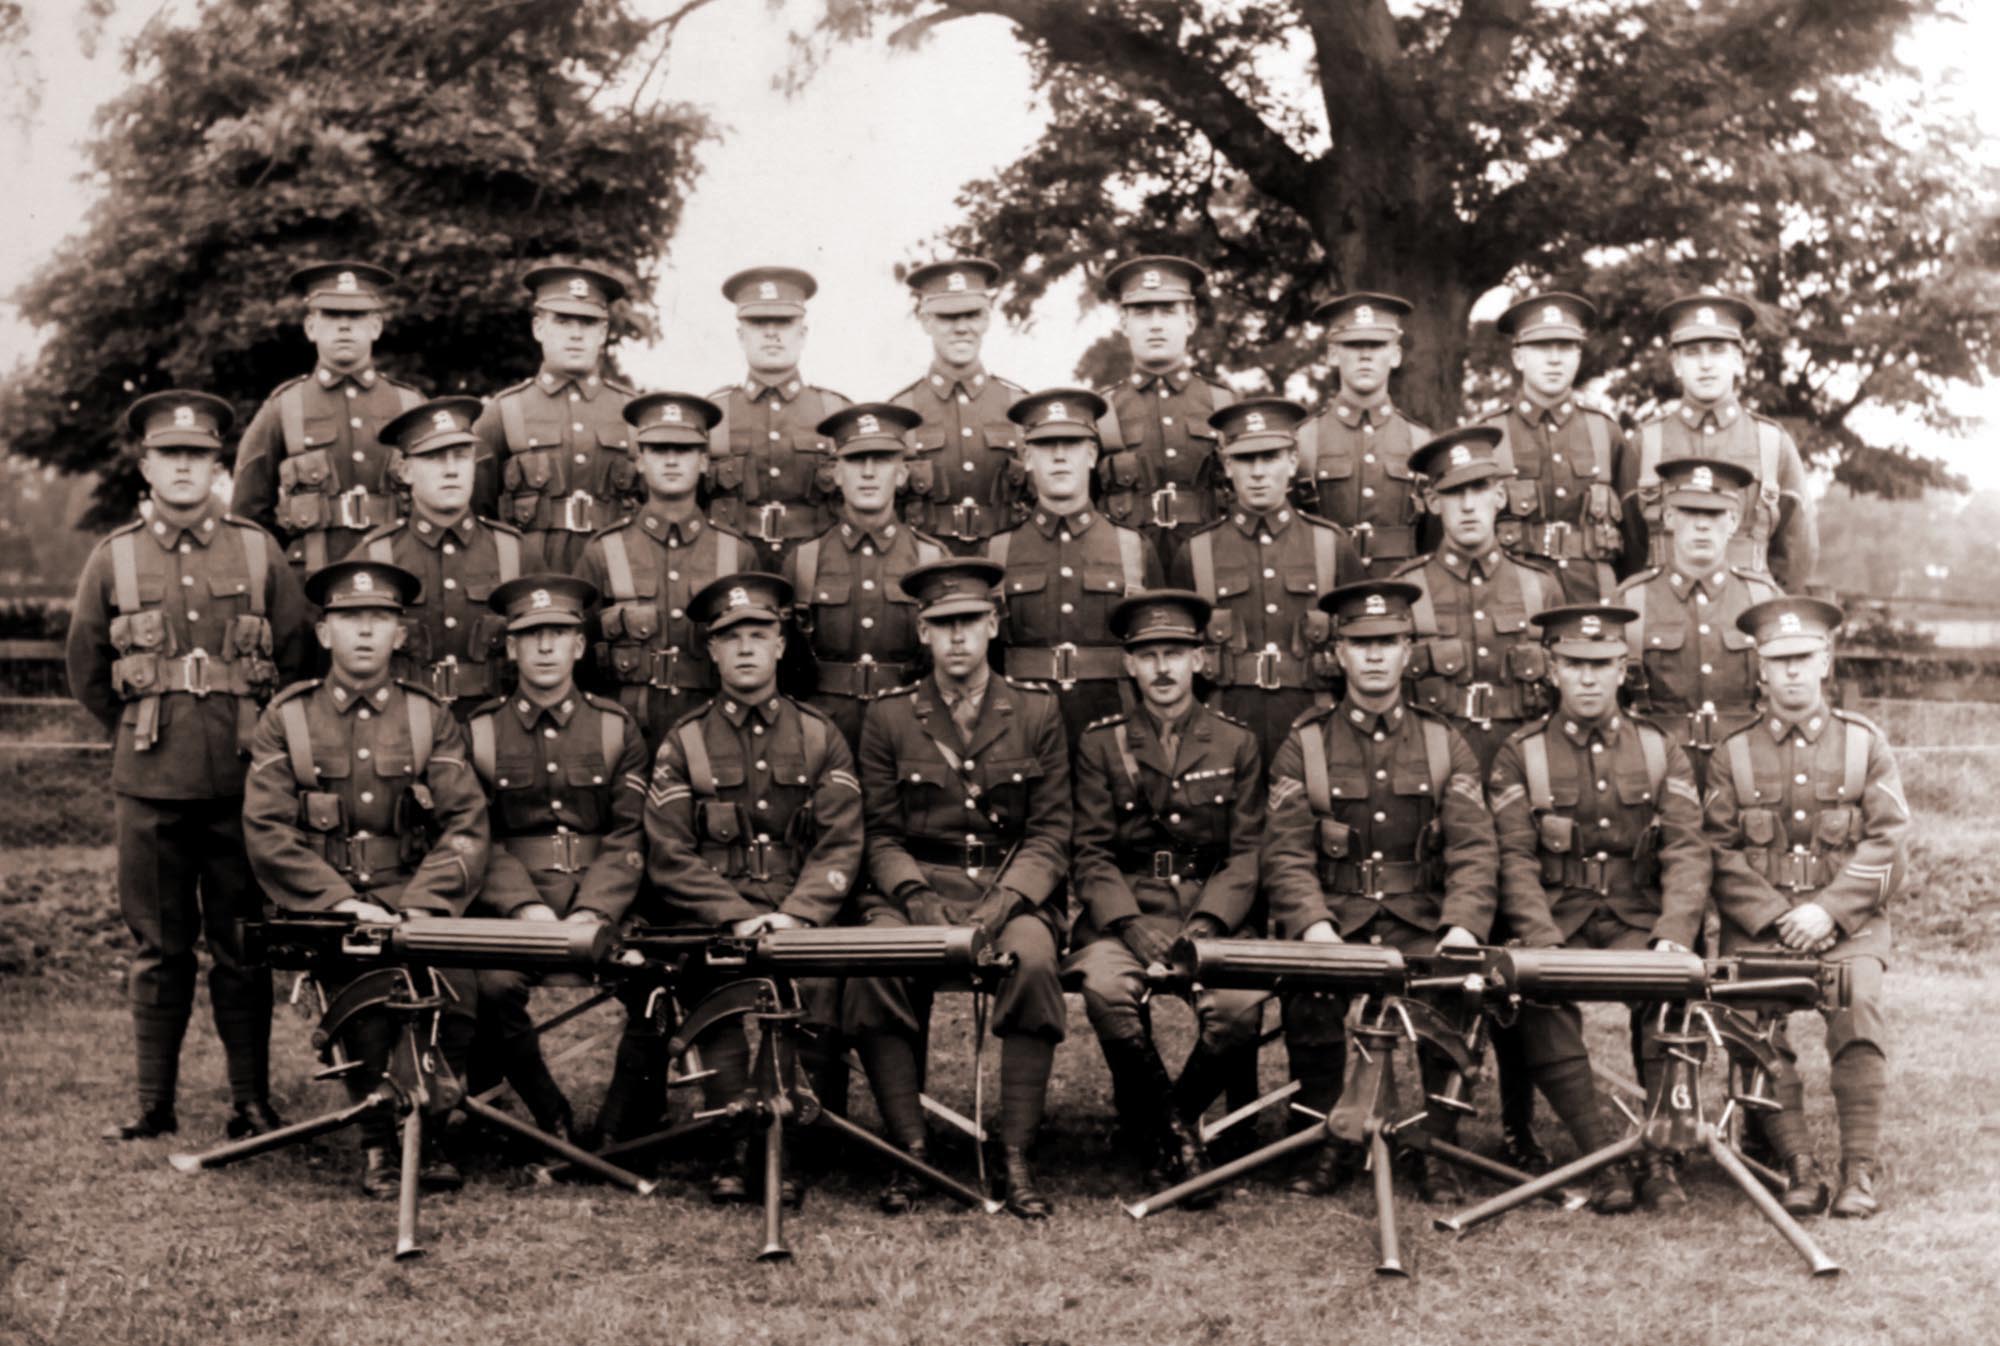 Leicester Regiment Soldiers, 1931 - Leicestershire Record Office